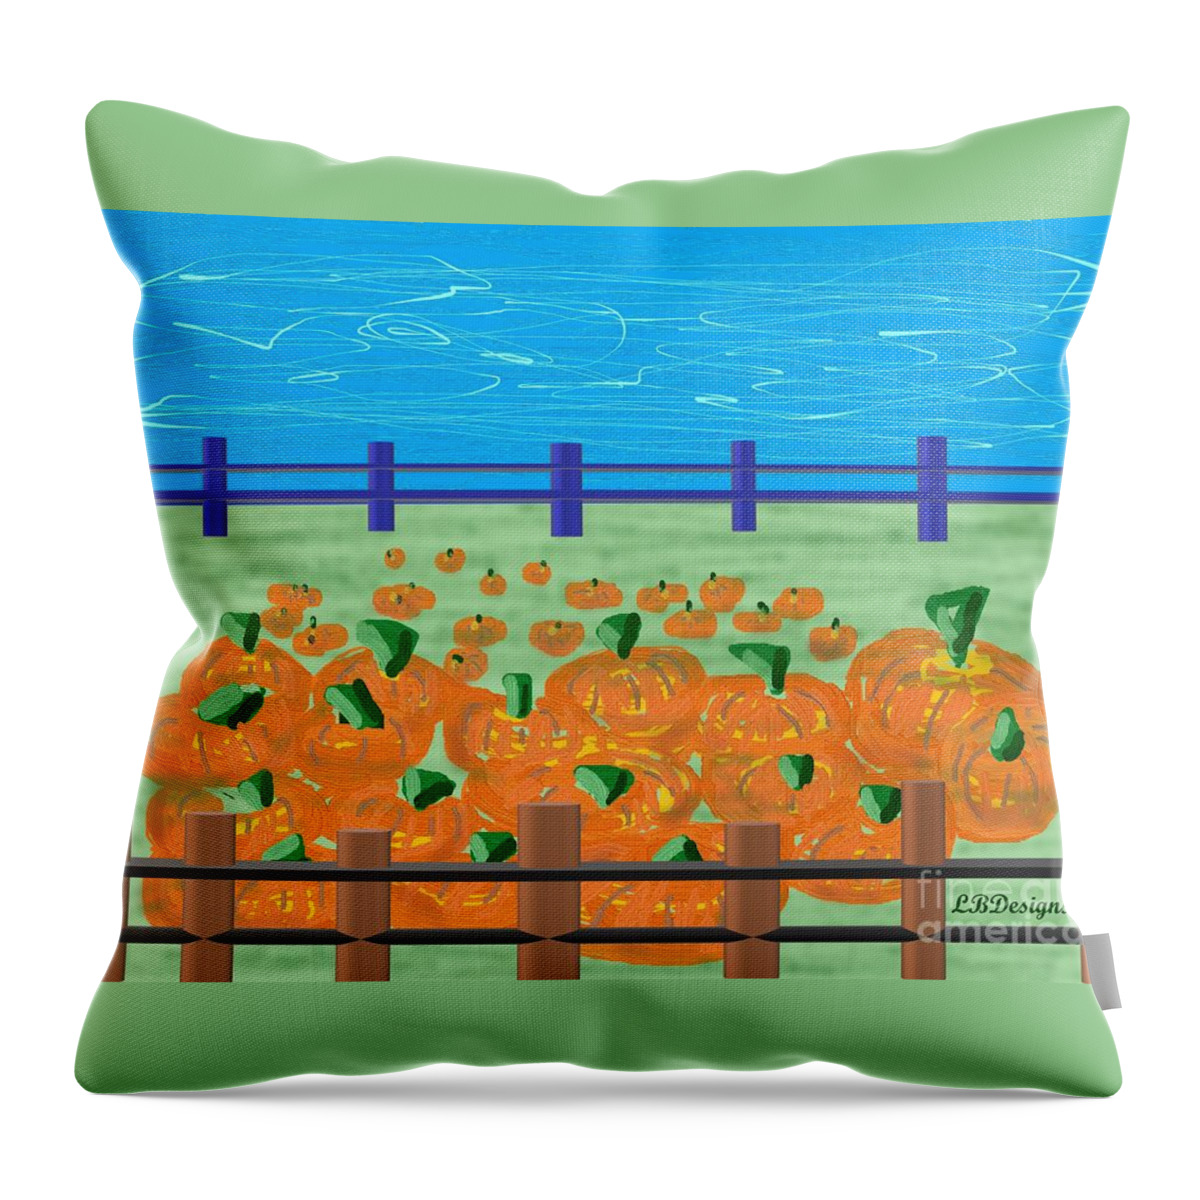 Keywords: “arts And Design”; Gallery; Images; “pumpkin Patch”; “ The Ranch”; “burgundy B.”; Quilting; “library”; Autumn Throw Pillow featuring the digital art Pumpkin Patch The Ranch by LBDesigns